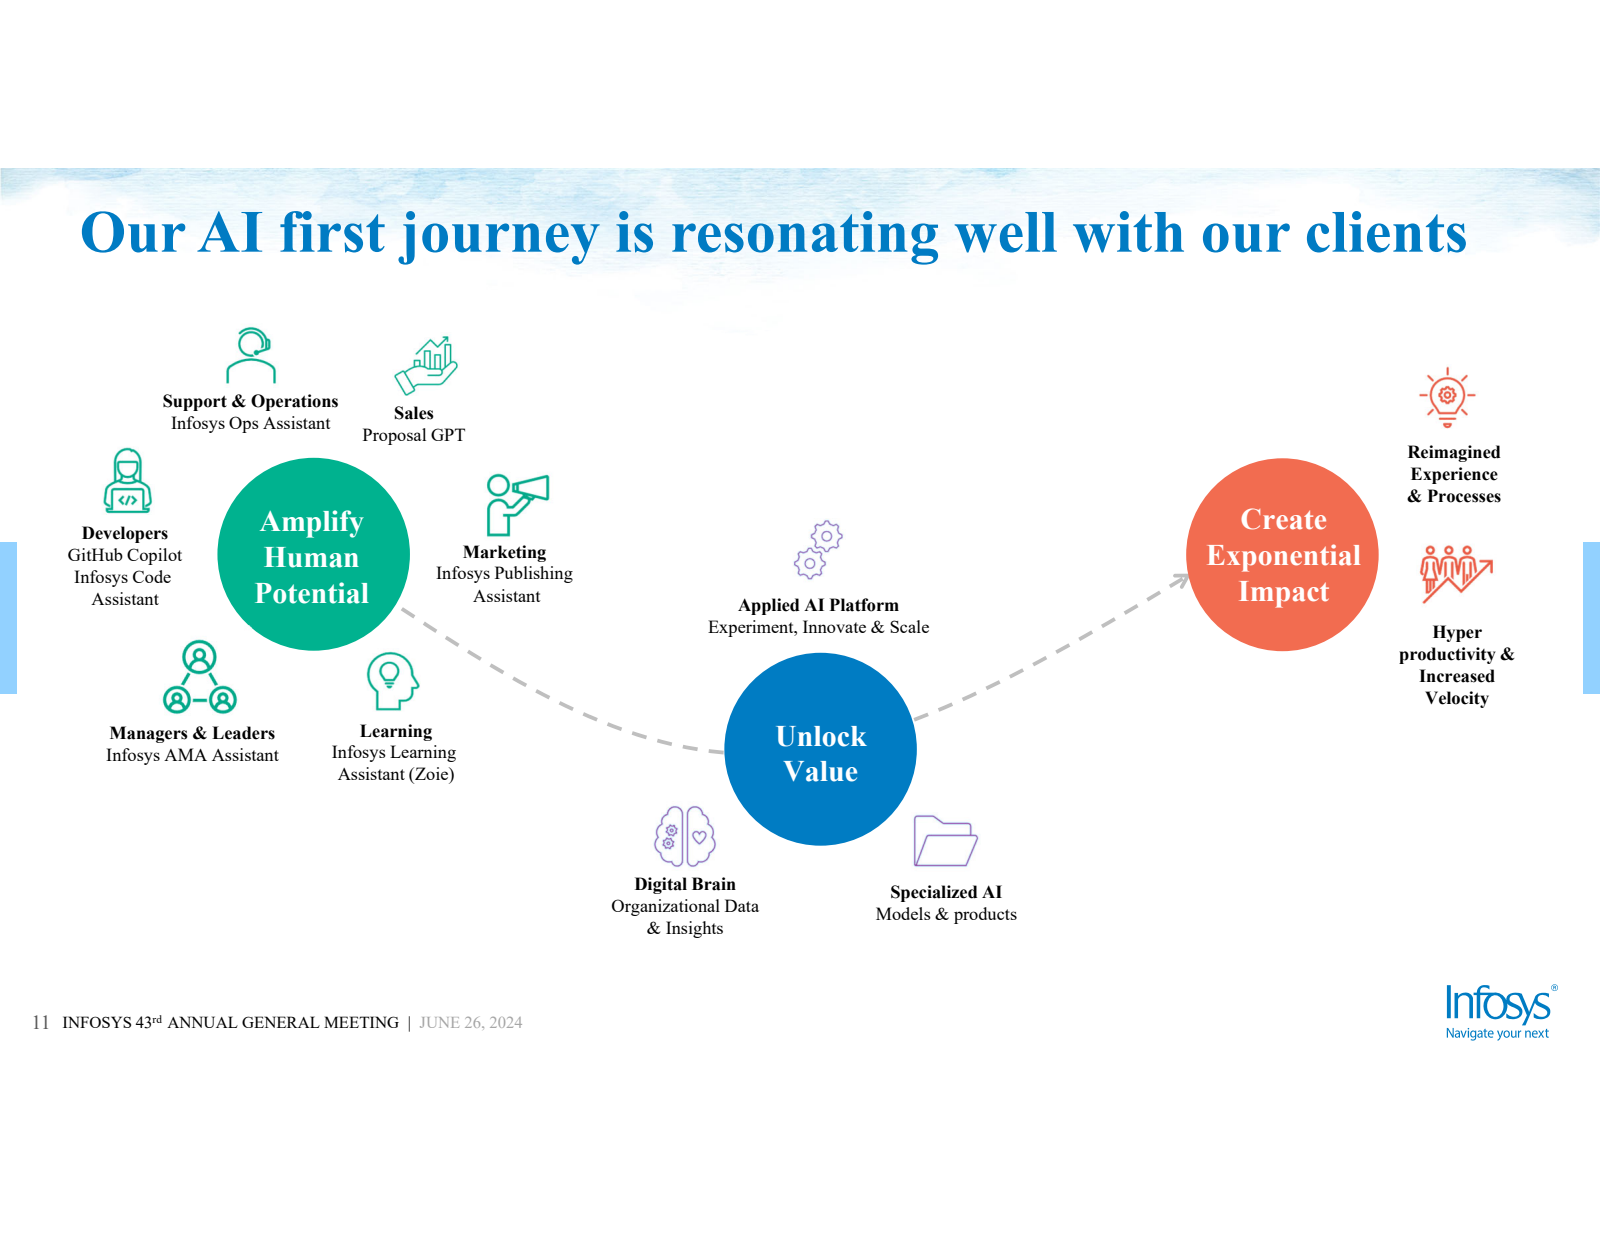 Our AI first journey